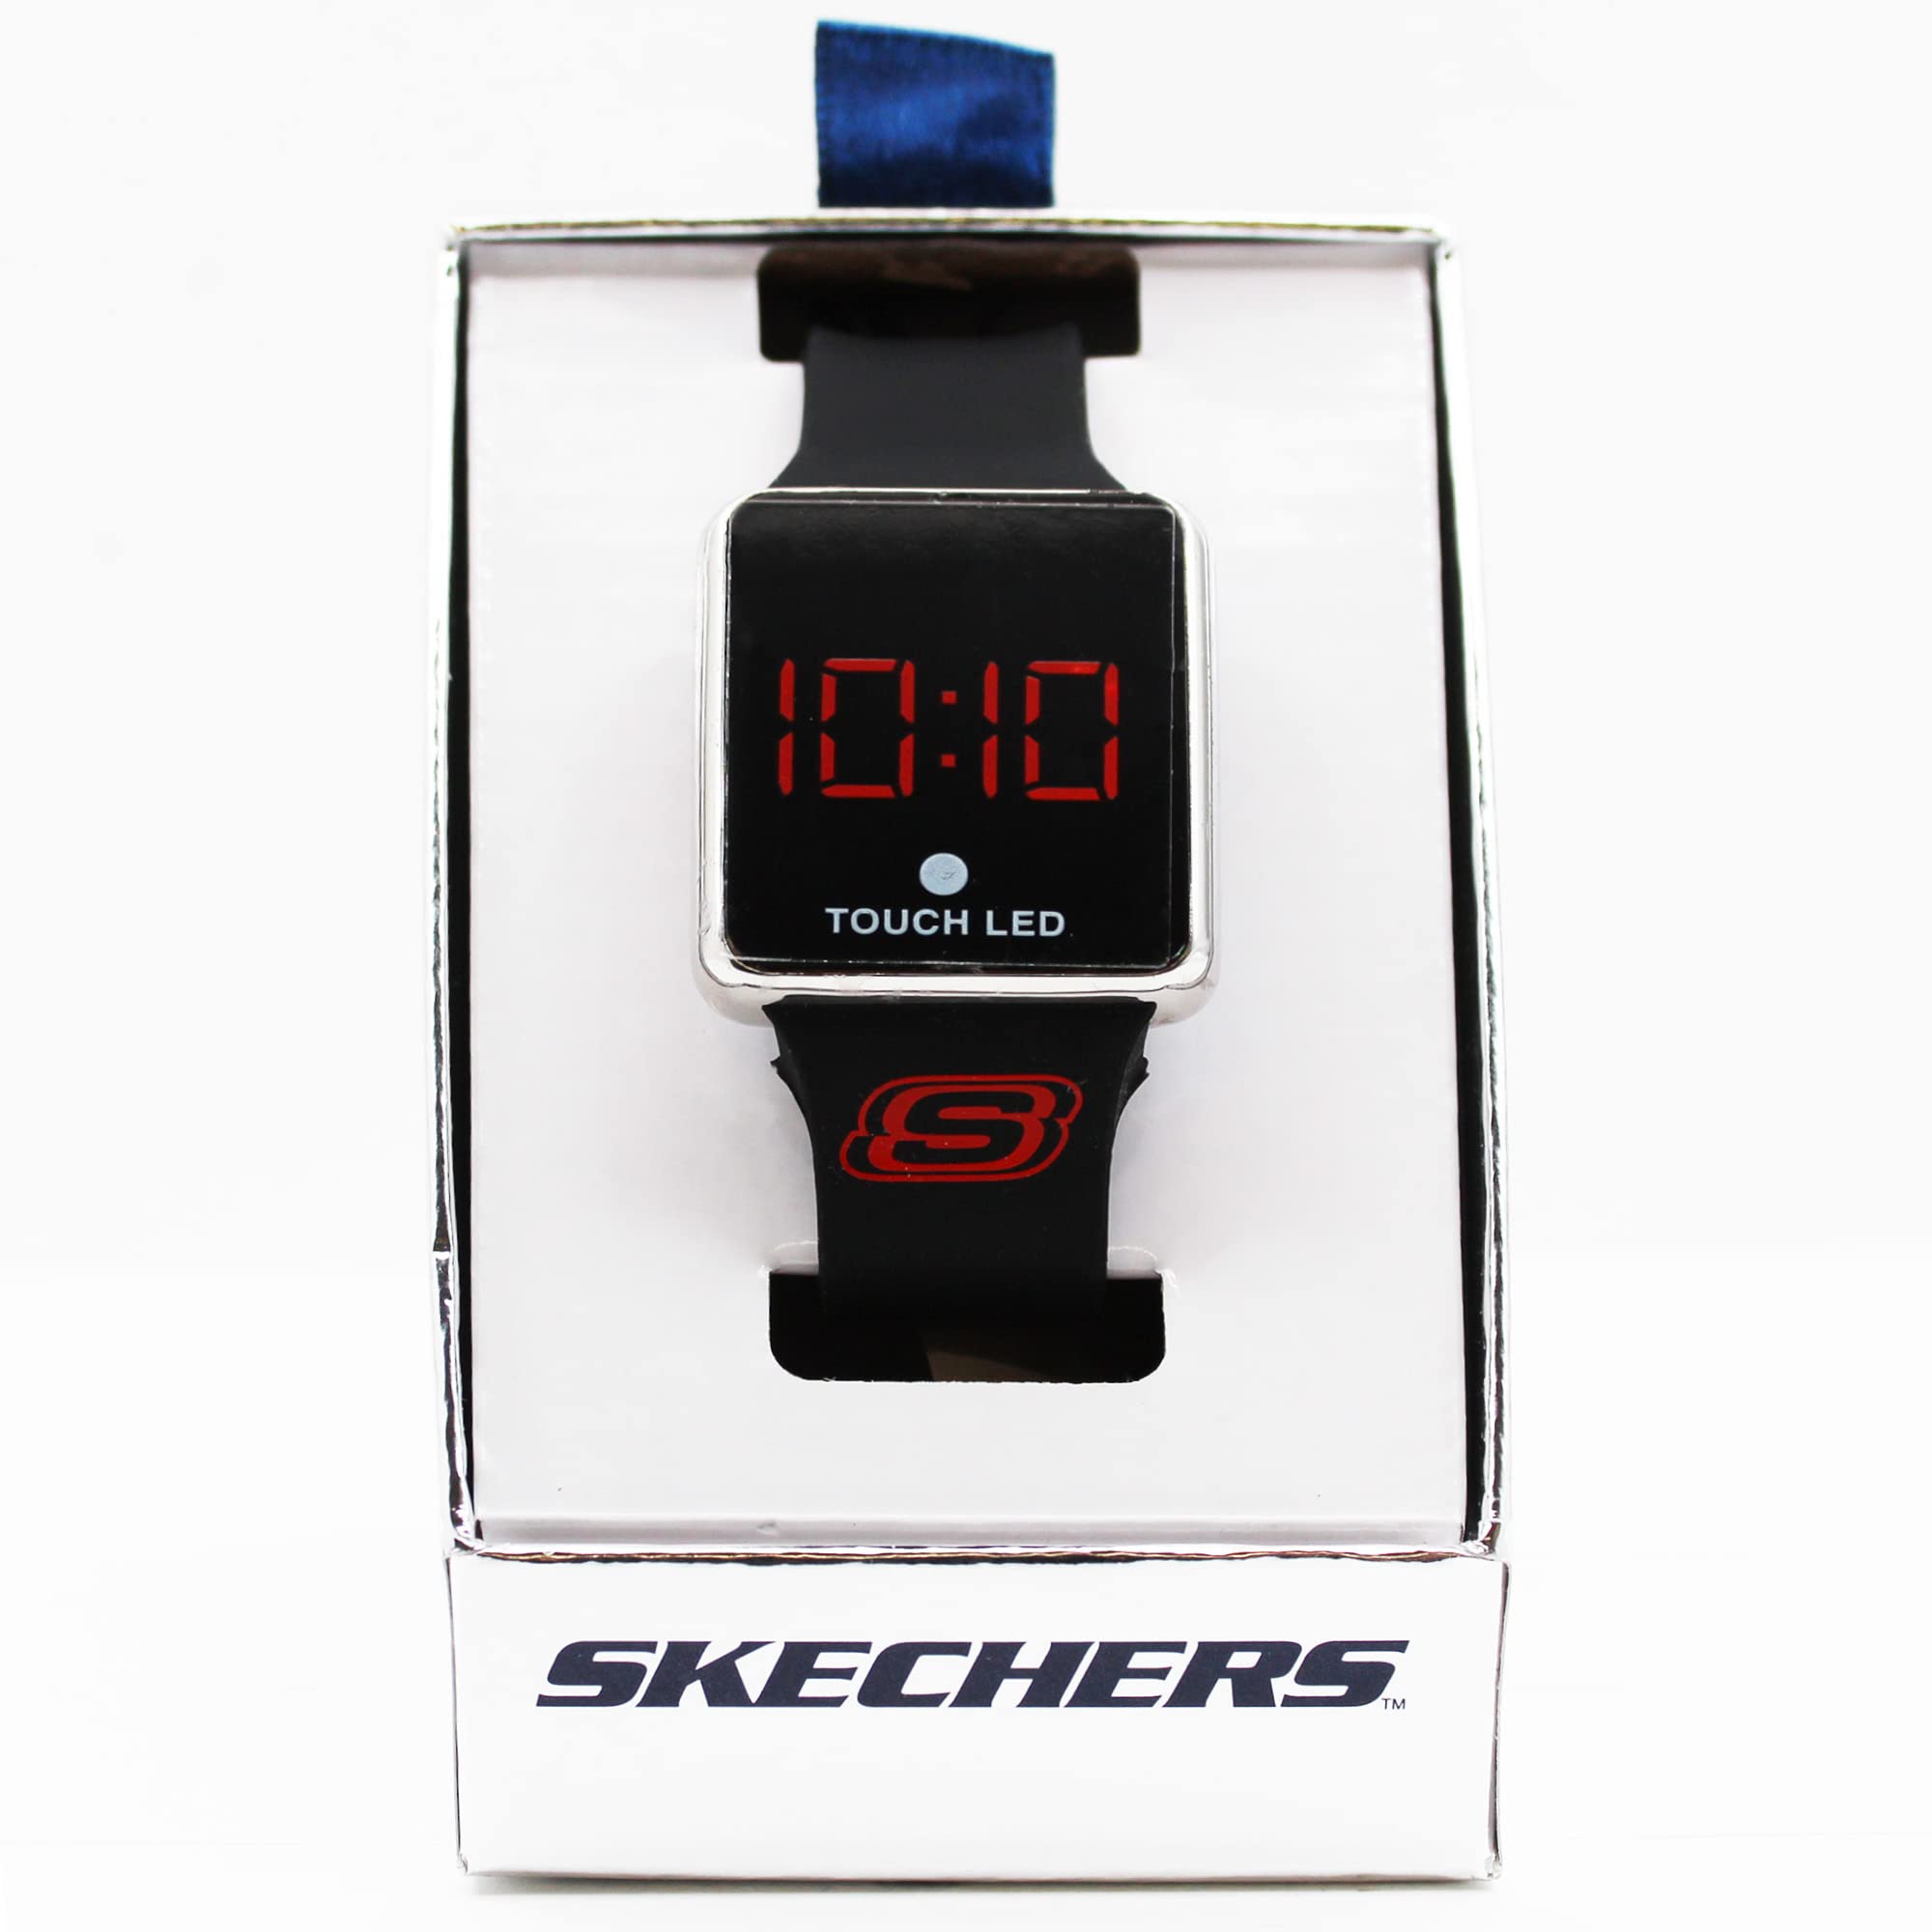 Accutime Skechers Black Digital Touch Quartz Watch with Red Digital Display, Silver-Tone Bezel, and Black Silicone Strap for Boys, Girls, Toddlers, All Ages (Model: SKE4021AZ)